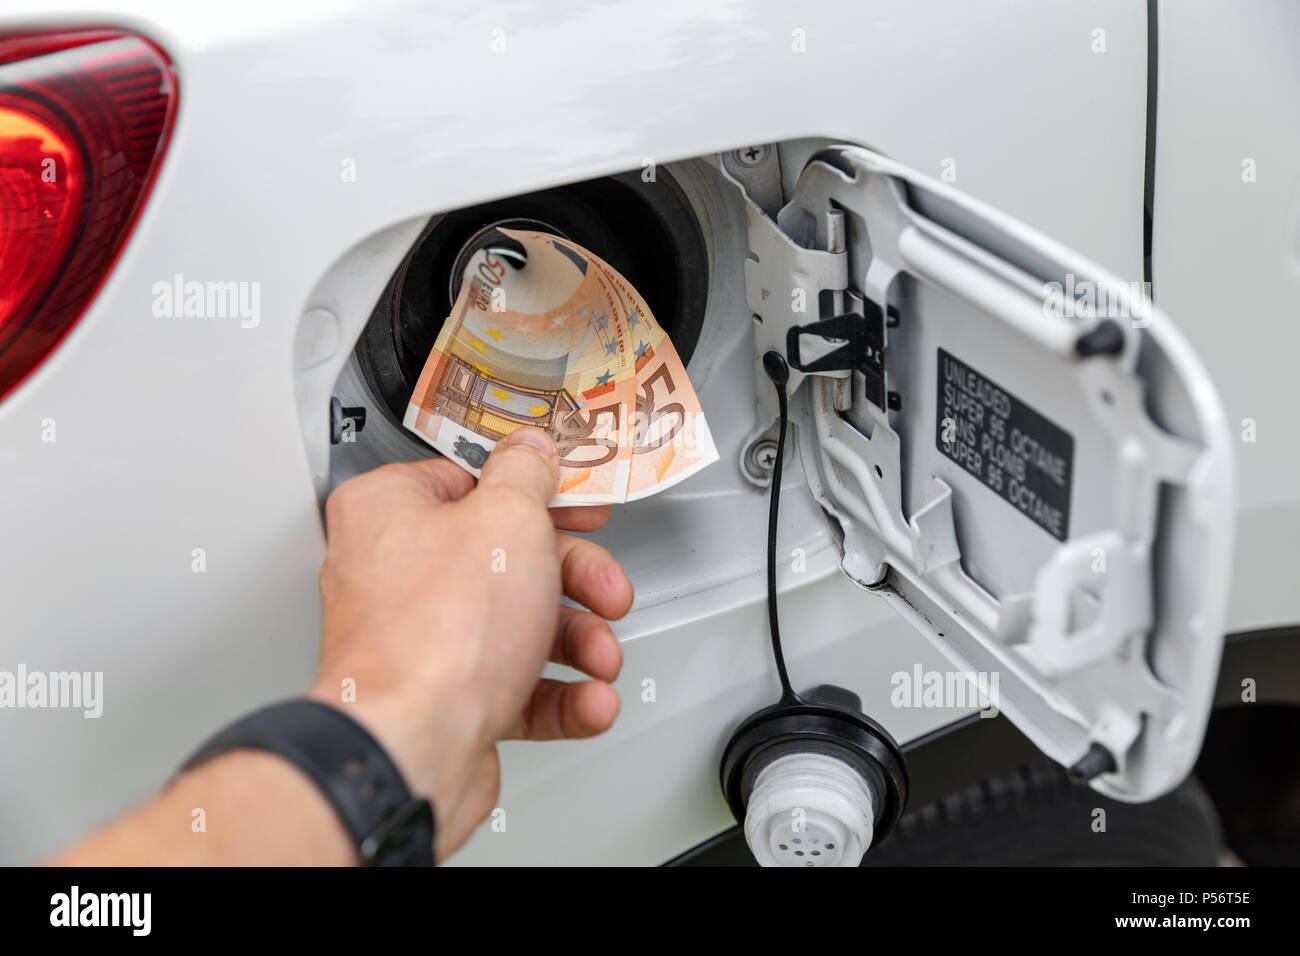 transport costs - hand inserting money in car fuel tank Stock Photo